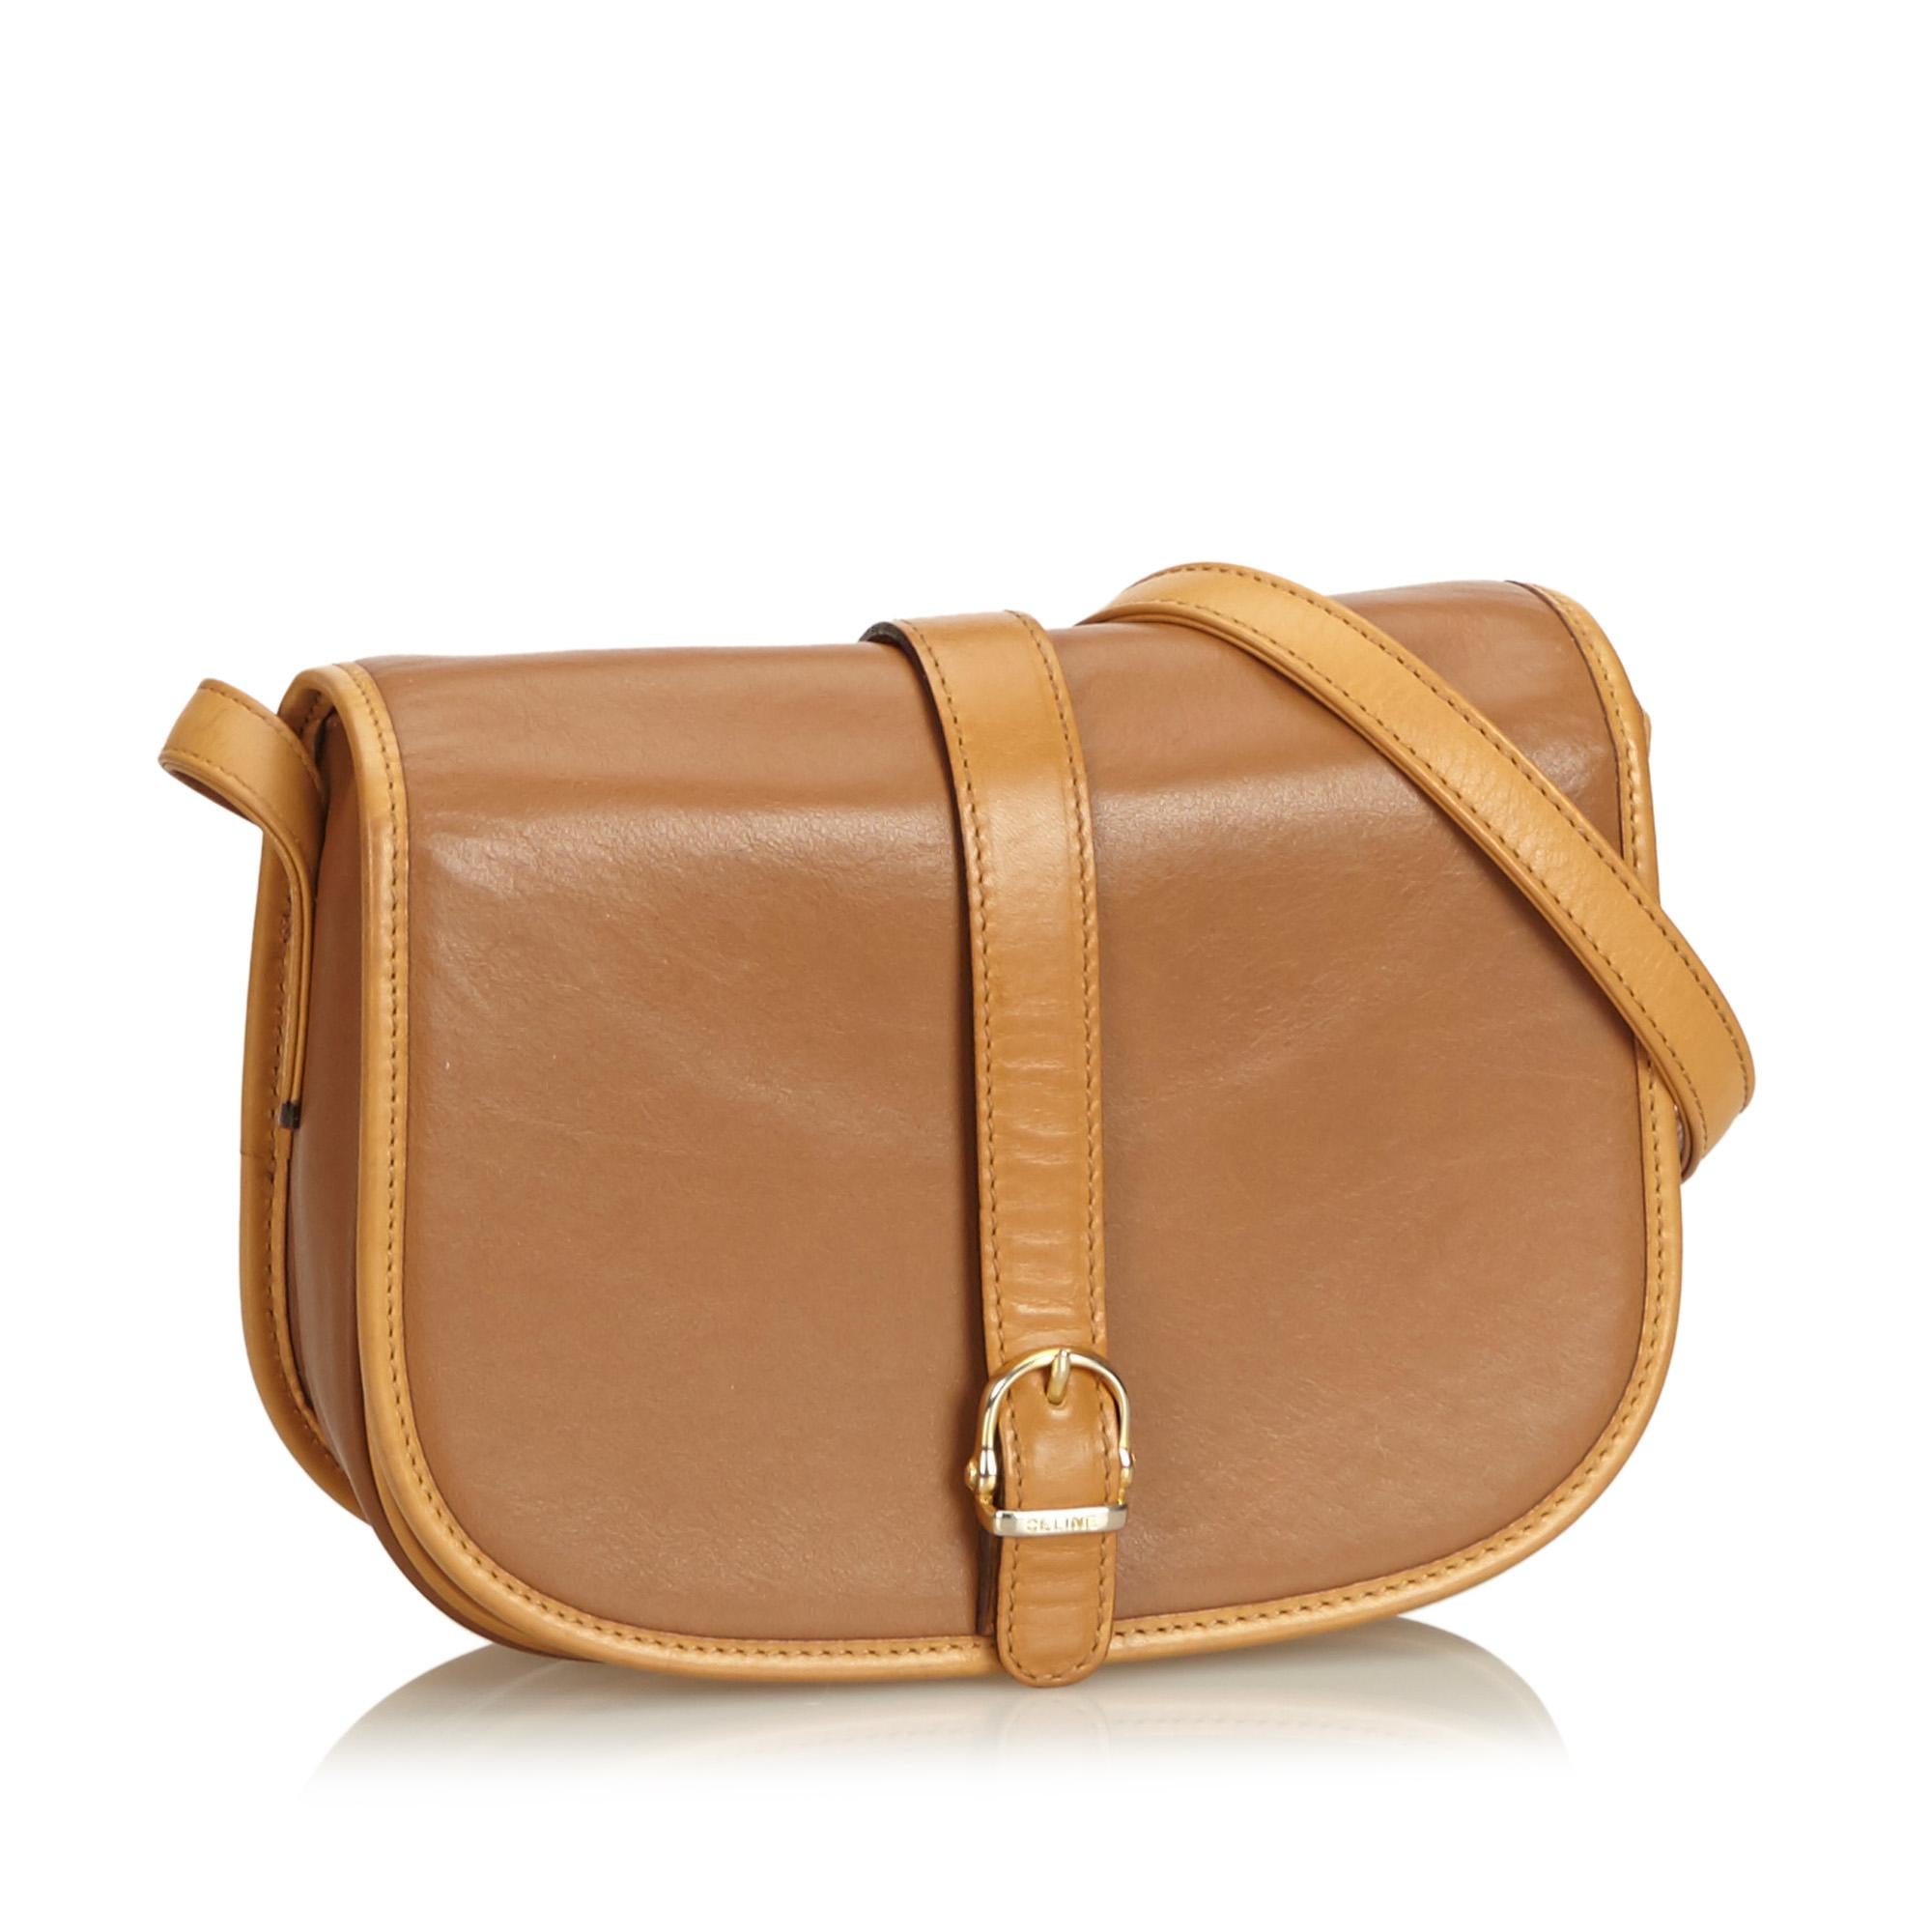 This shoulder bag features a leather body, a flat strap, a front flap with a magnetic closure, and an interior zip pocket. It carries as B+ condition rating.

Inclusions: 
Dust Bag

Dimensions:
Length: 18.00 cm
Width: 21.00 cm
Depth: 5.00